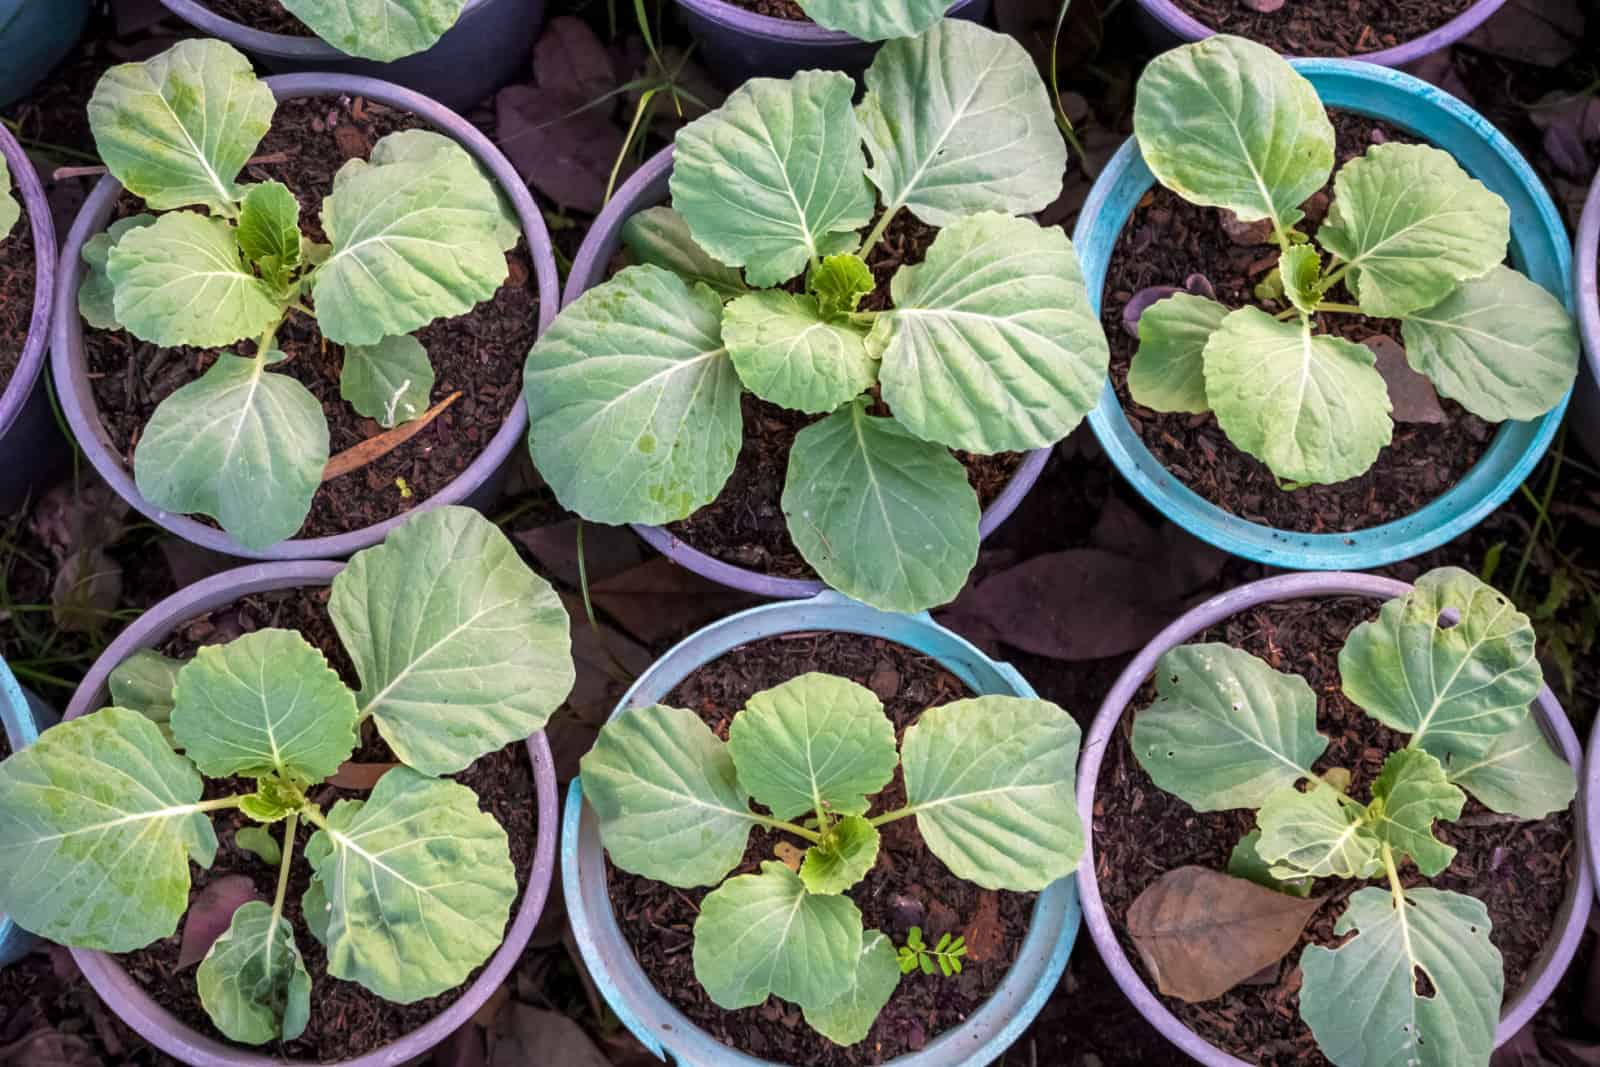 Organic collard greens planted in pots for daily nutritional needs